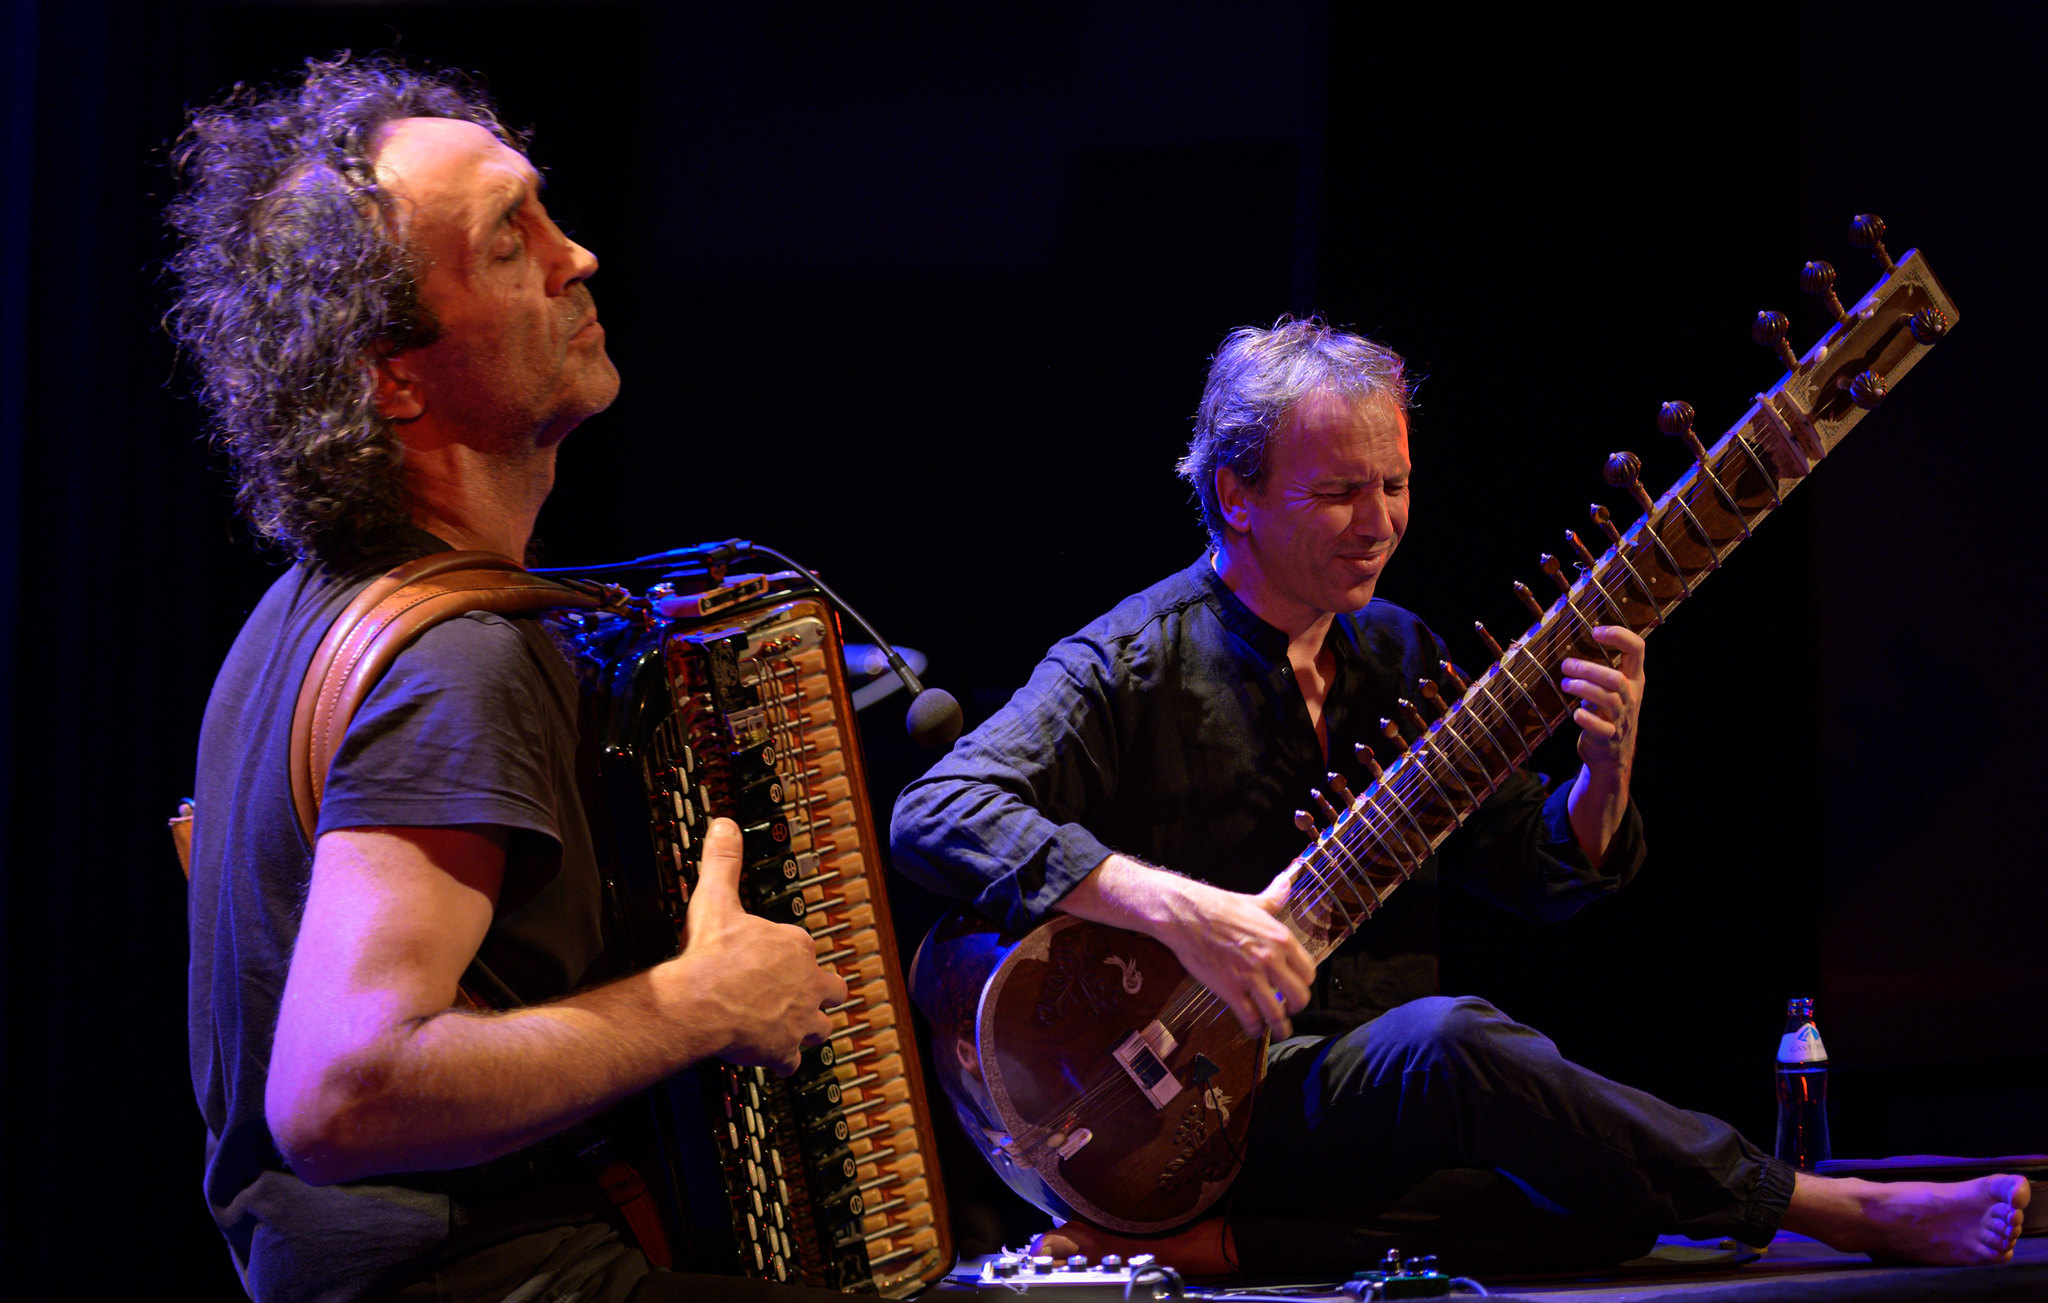 Klaus Falschlunger et Luciano Biondini sitar et accord�on